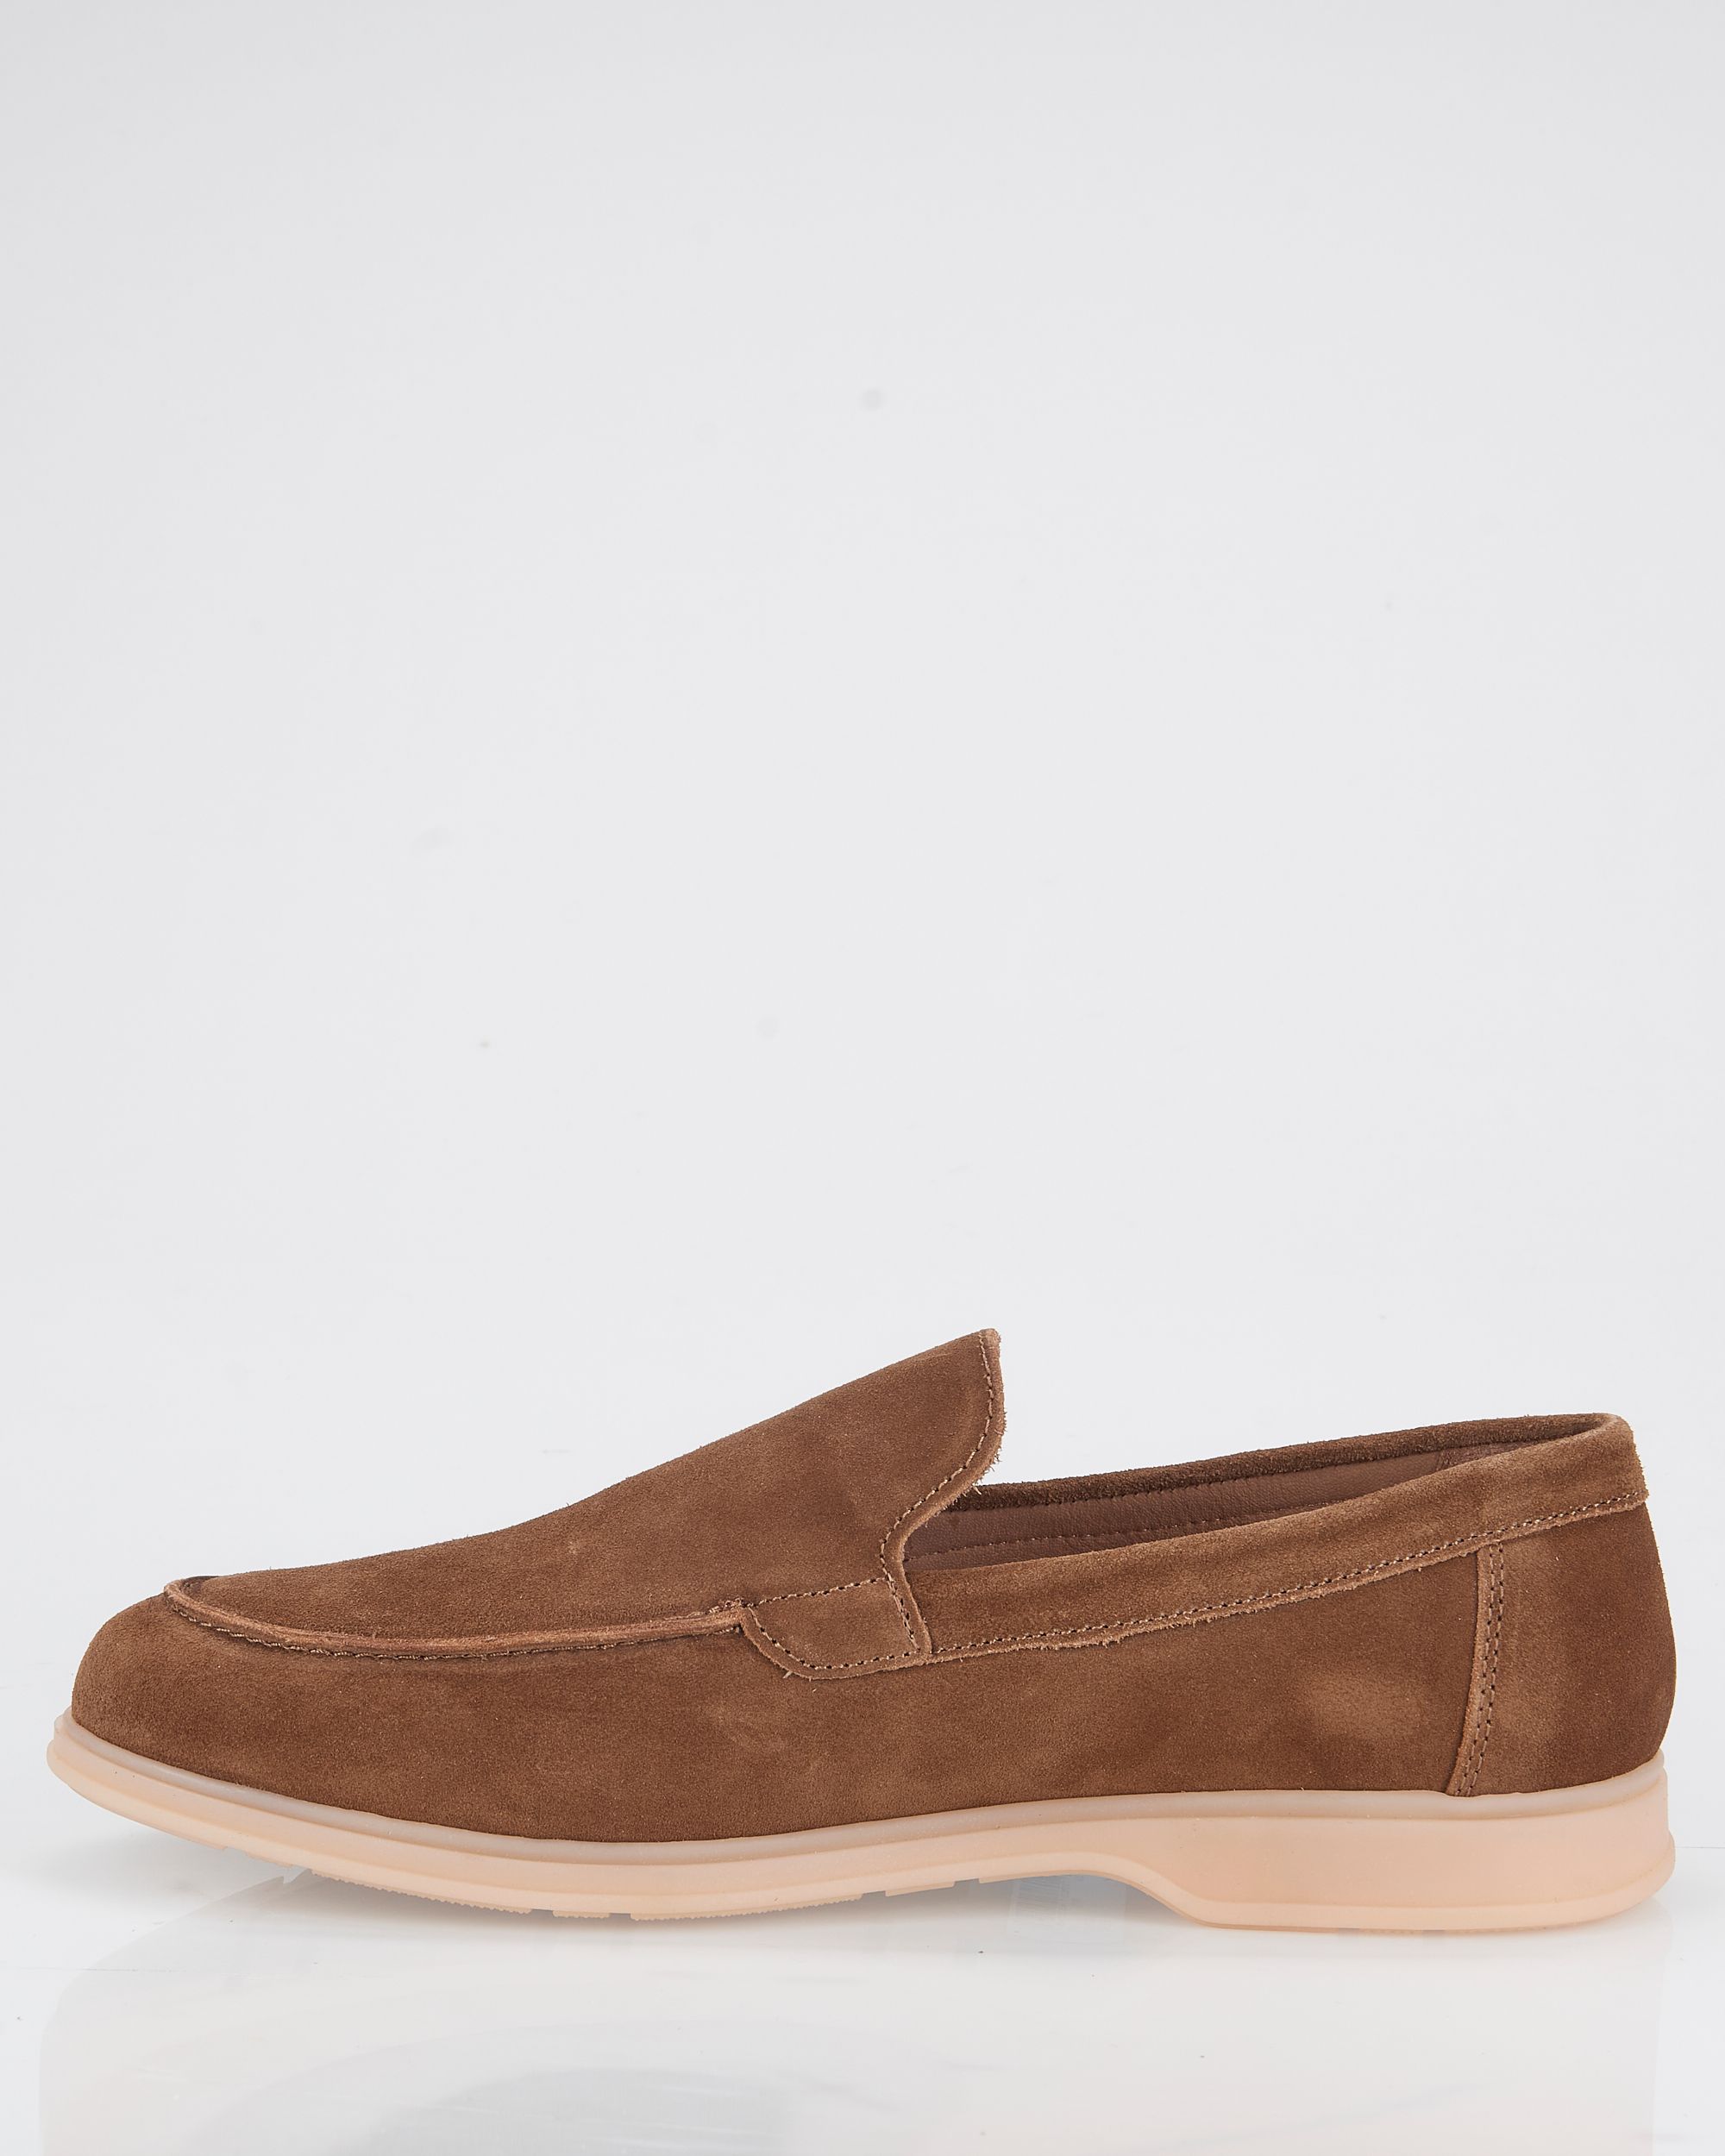 Campbell Classic Loafers Bruin uni 075979-004-40